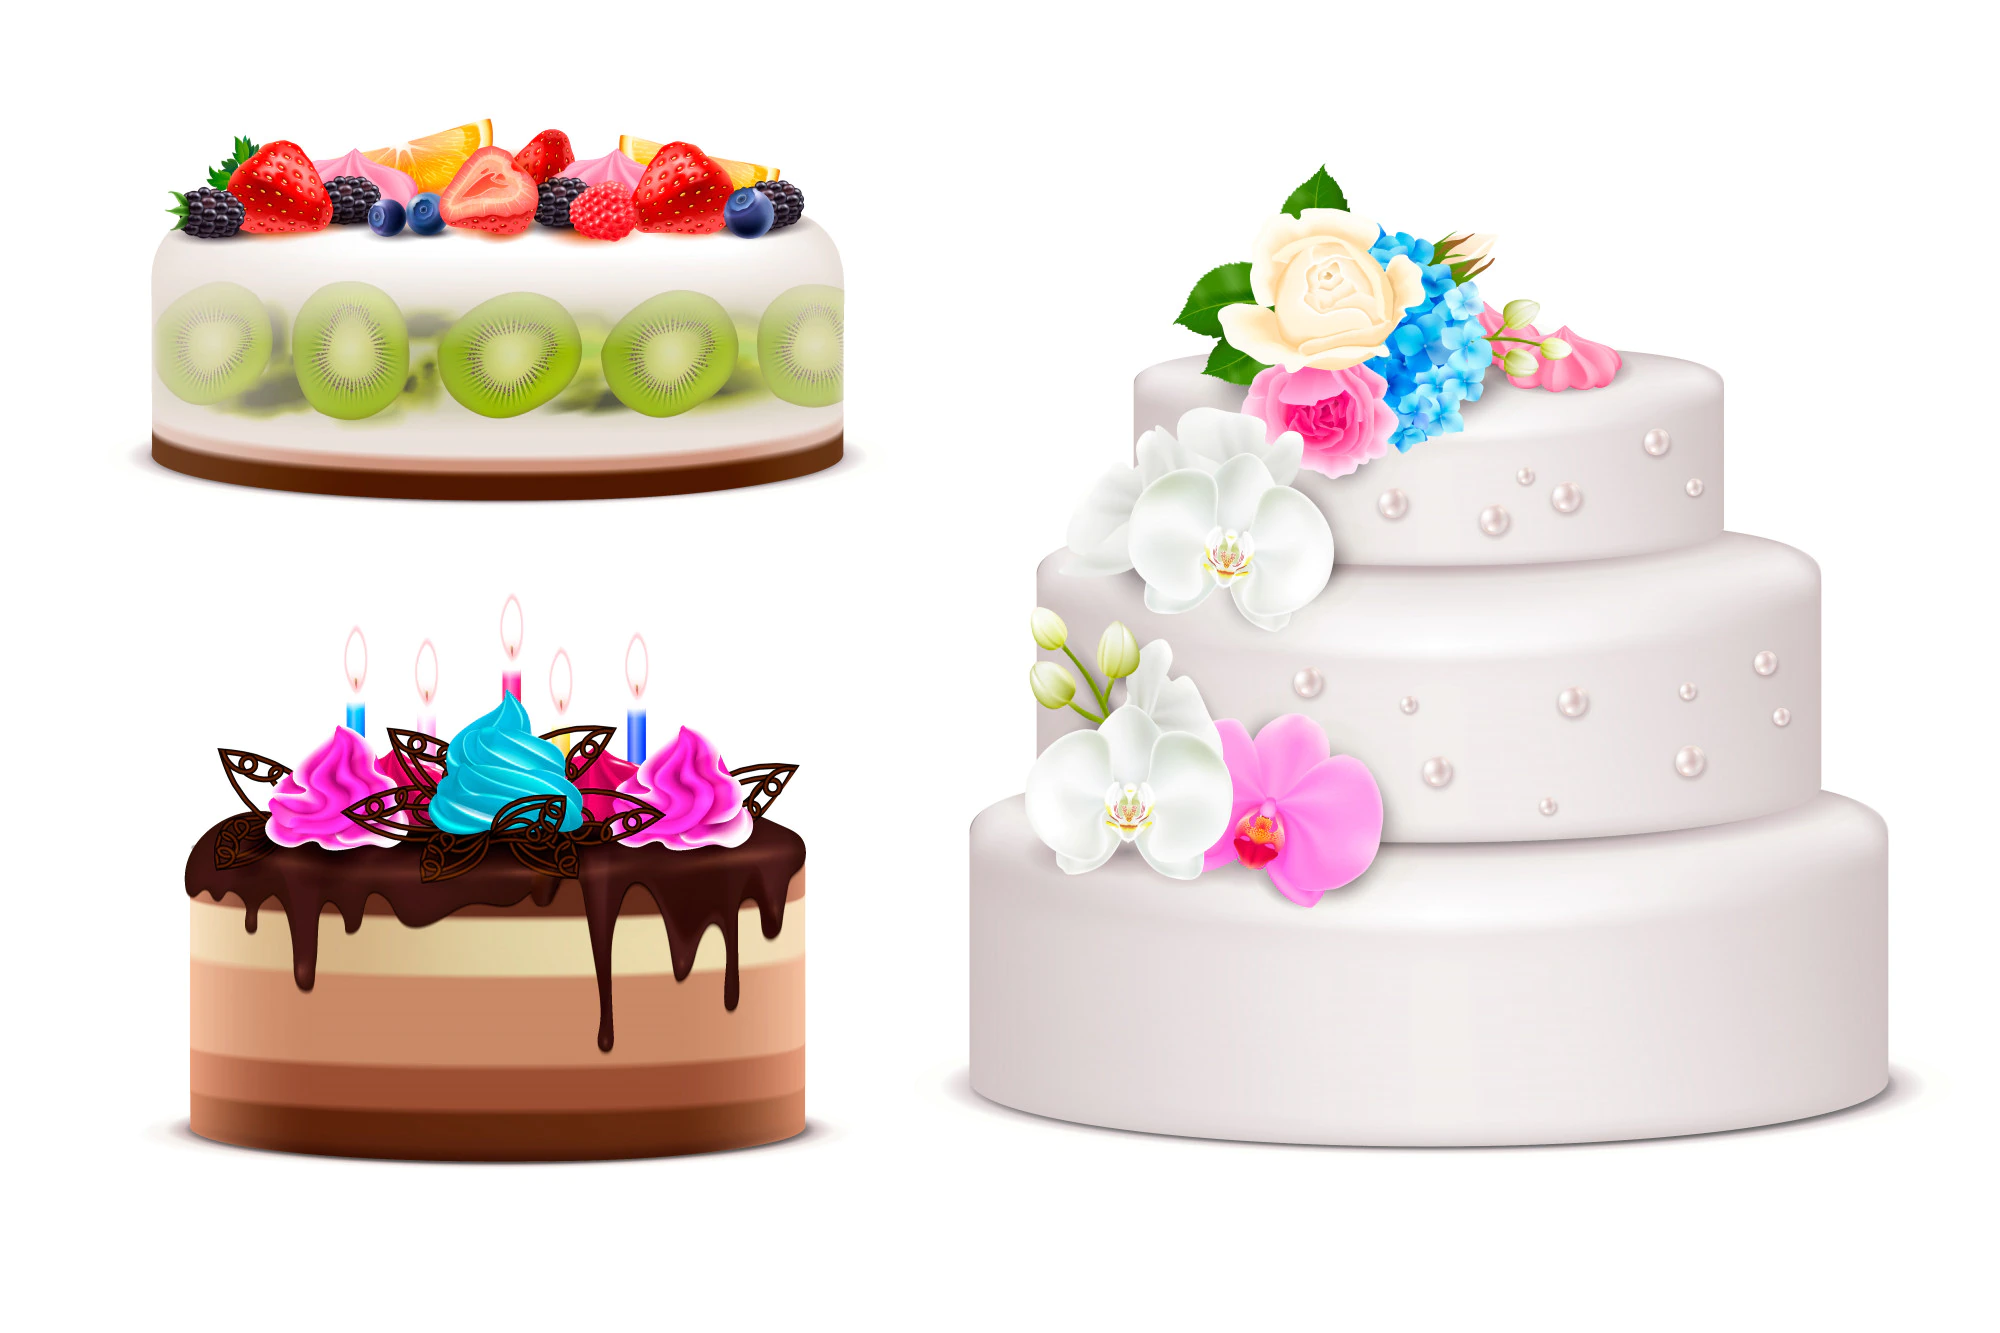 realistic set birthday wedding festive cakes decorated by cream bouquet lighted candles fresh fruits isolated illustration 1284 31187